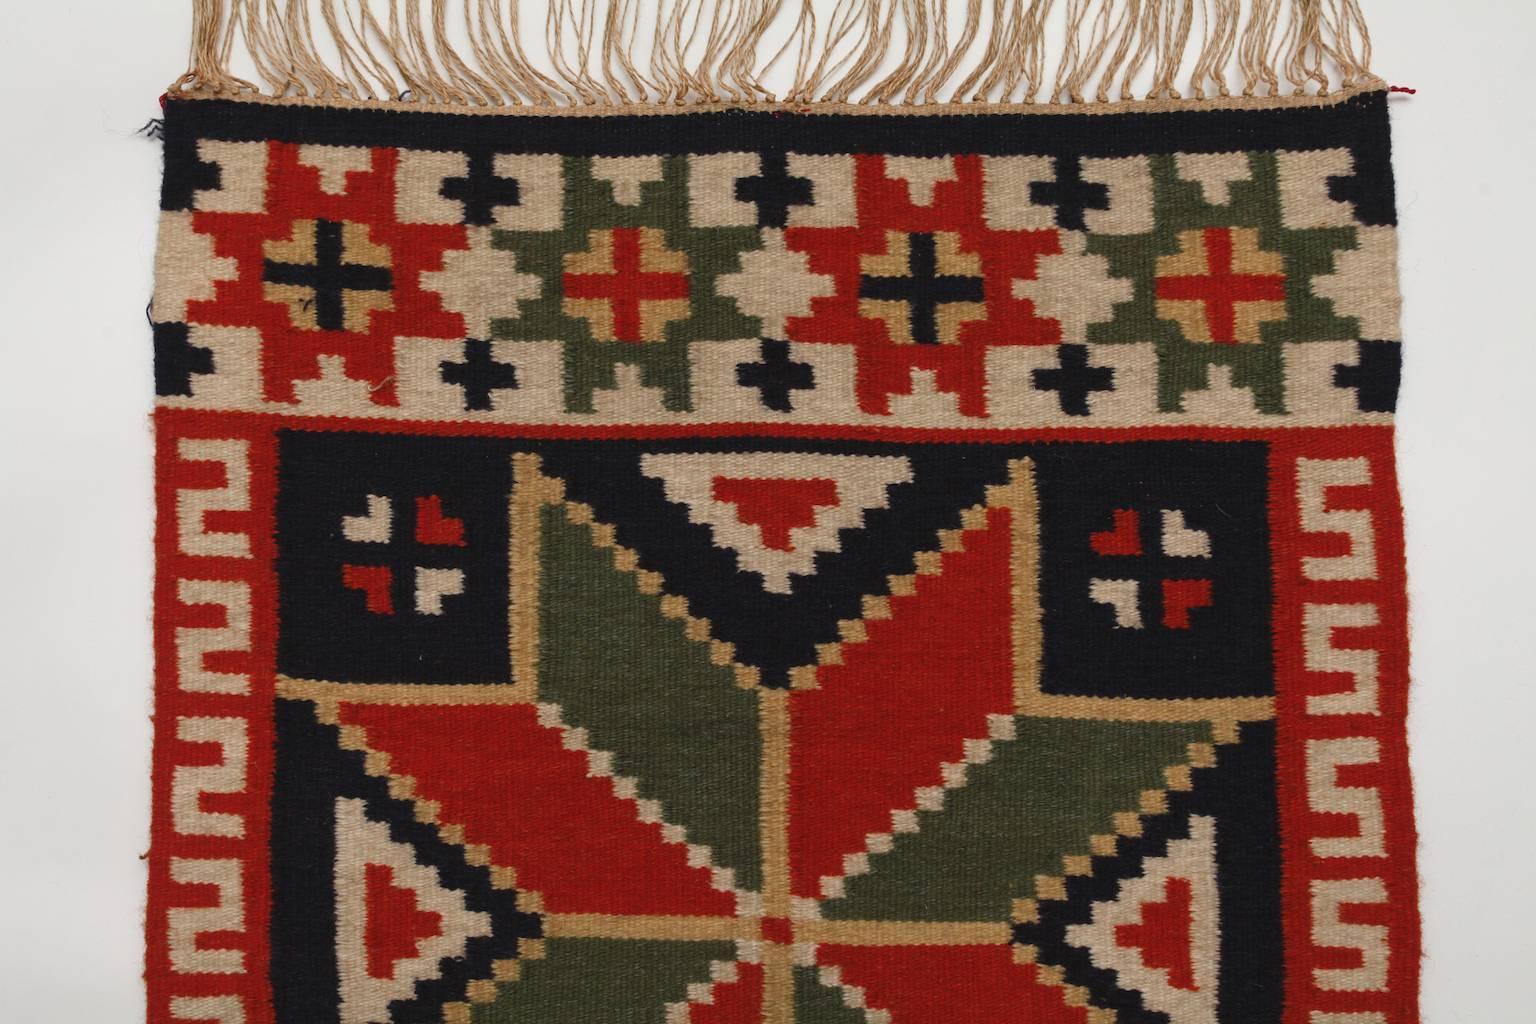 A beautiful handmade Swedish wool and linen "Agedyna" from Ingelstads Härad in the province Skåne in south of Sweden probably made in the beginning of the 1900s.
Linded on the back with linen. The main motif on this piece is two stars